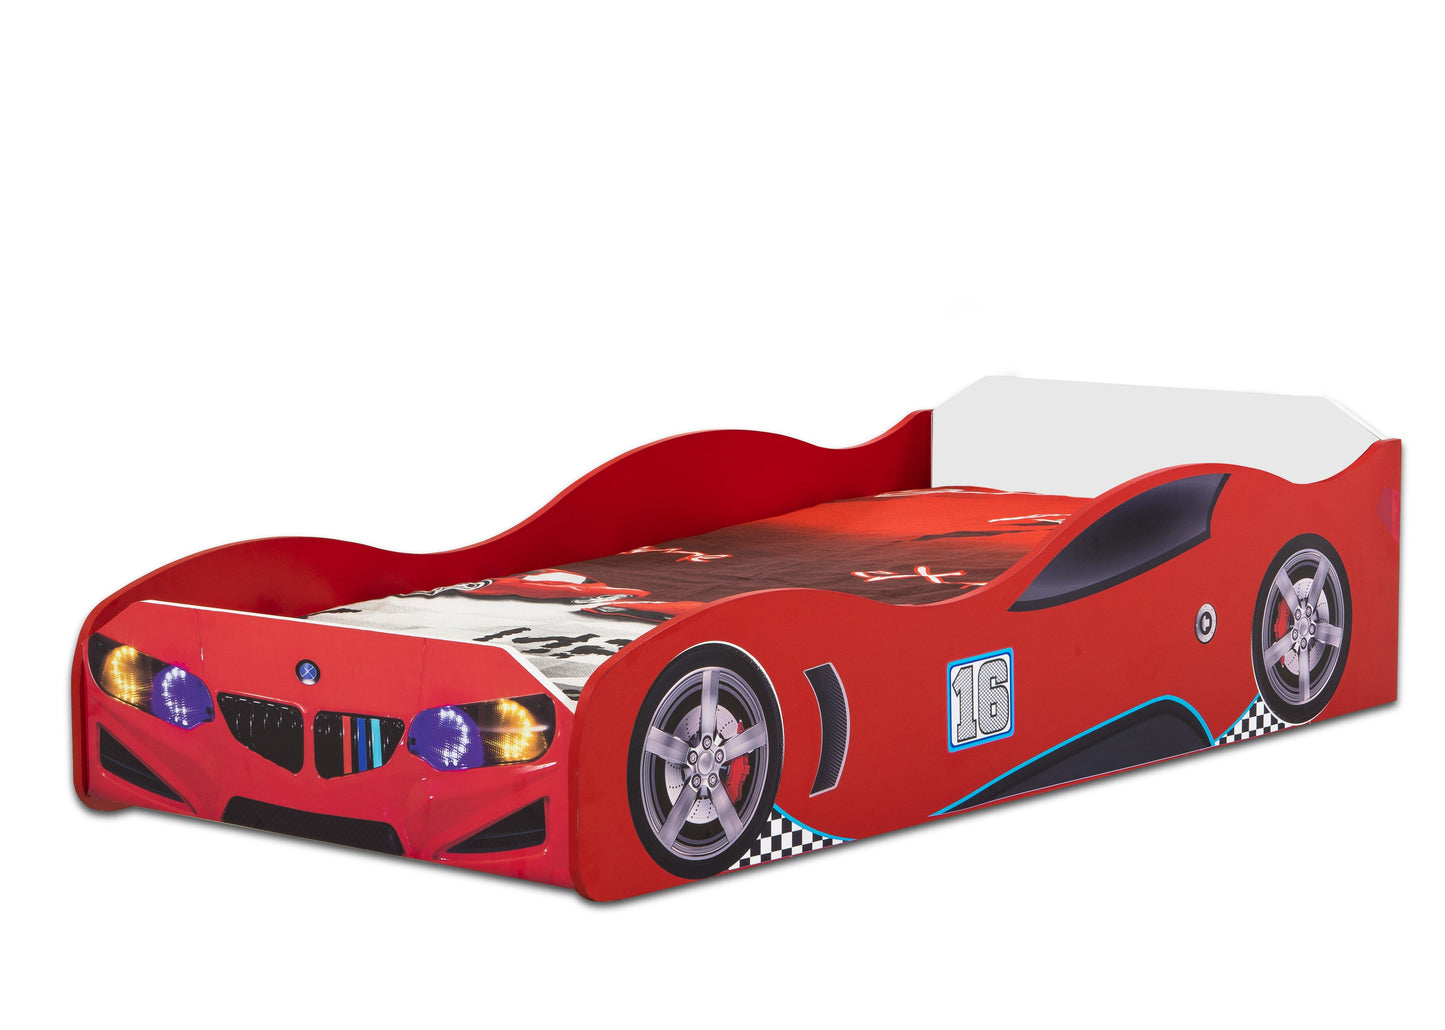 Race to bed! Kids will love the Boca Twin Kit Race Car Bed. The design includes a rear spoiler and decals of a front grille, racing tires, and headlights. 